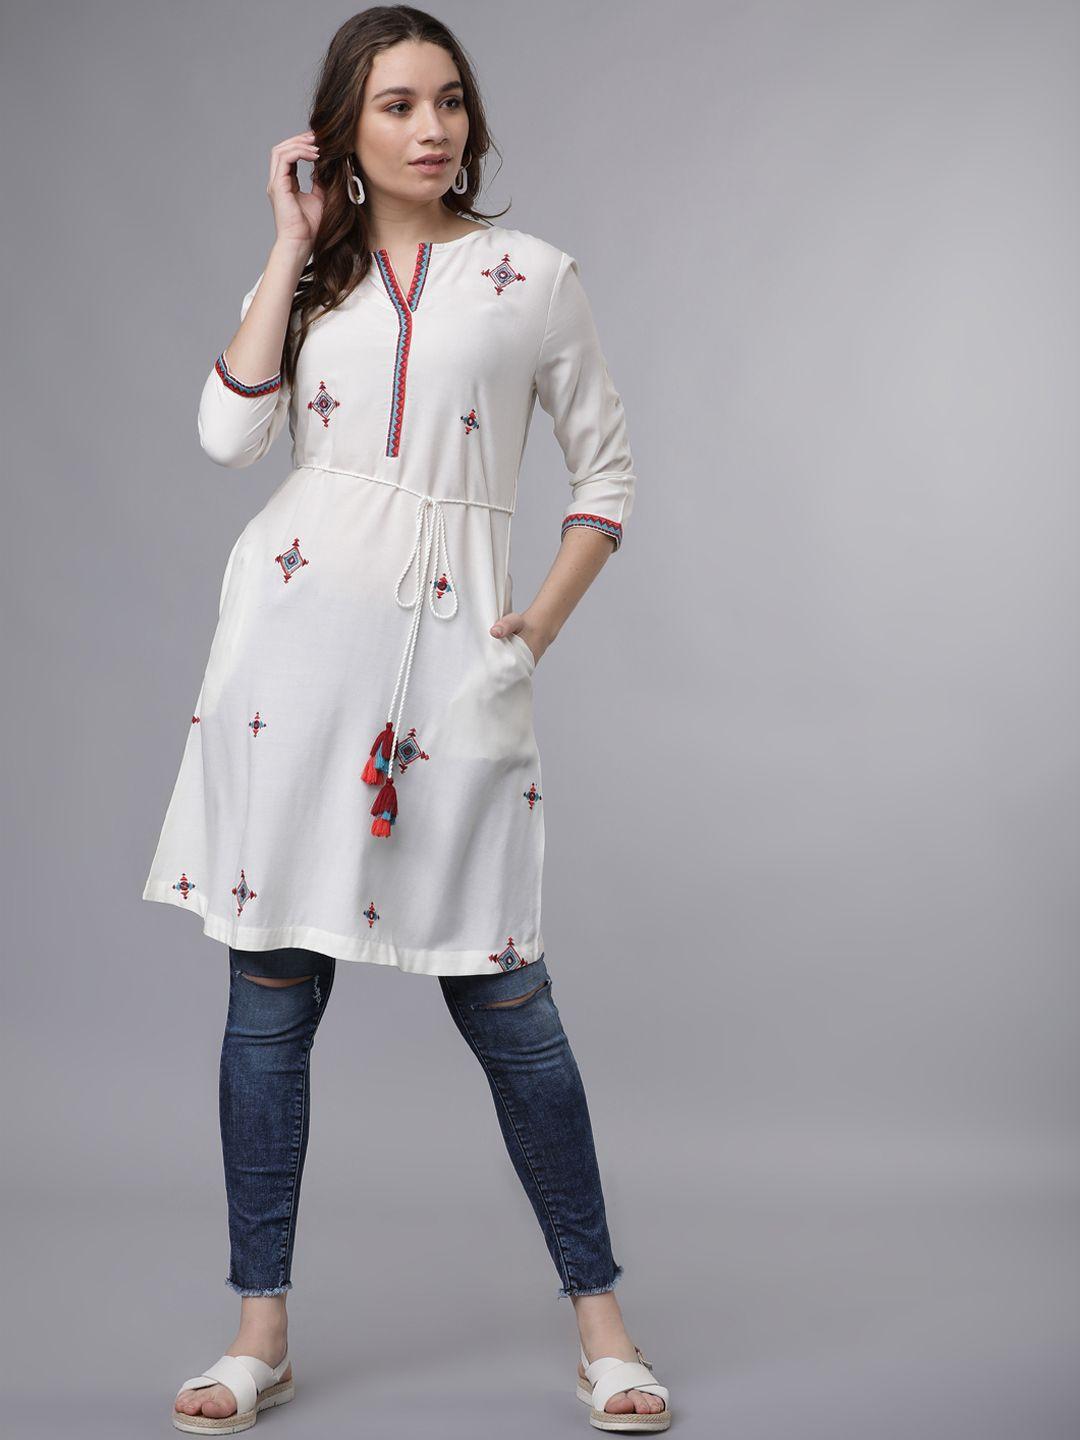 vishudh-women's-white-&-red-embroidered-tunic